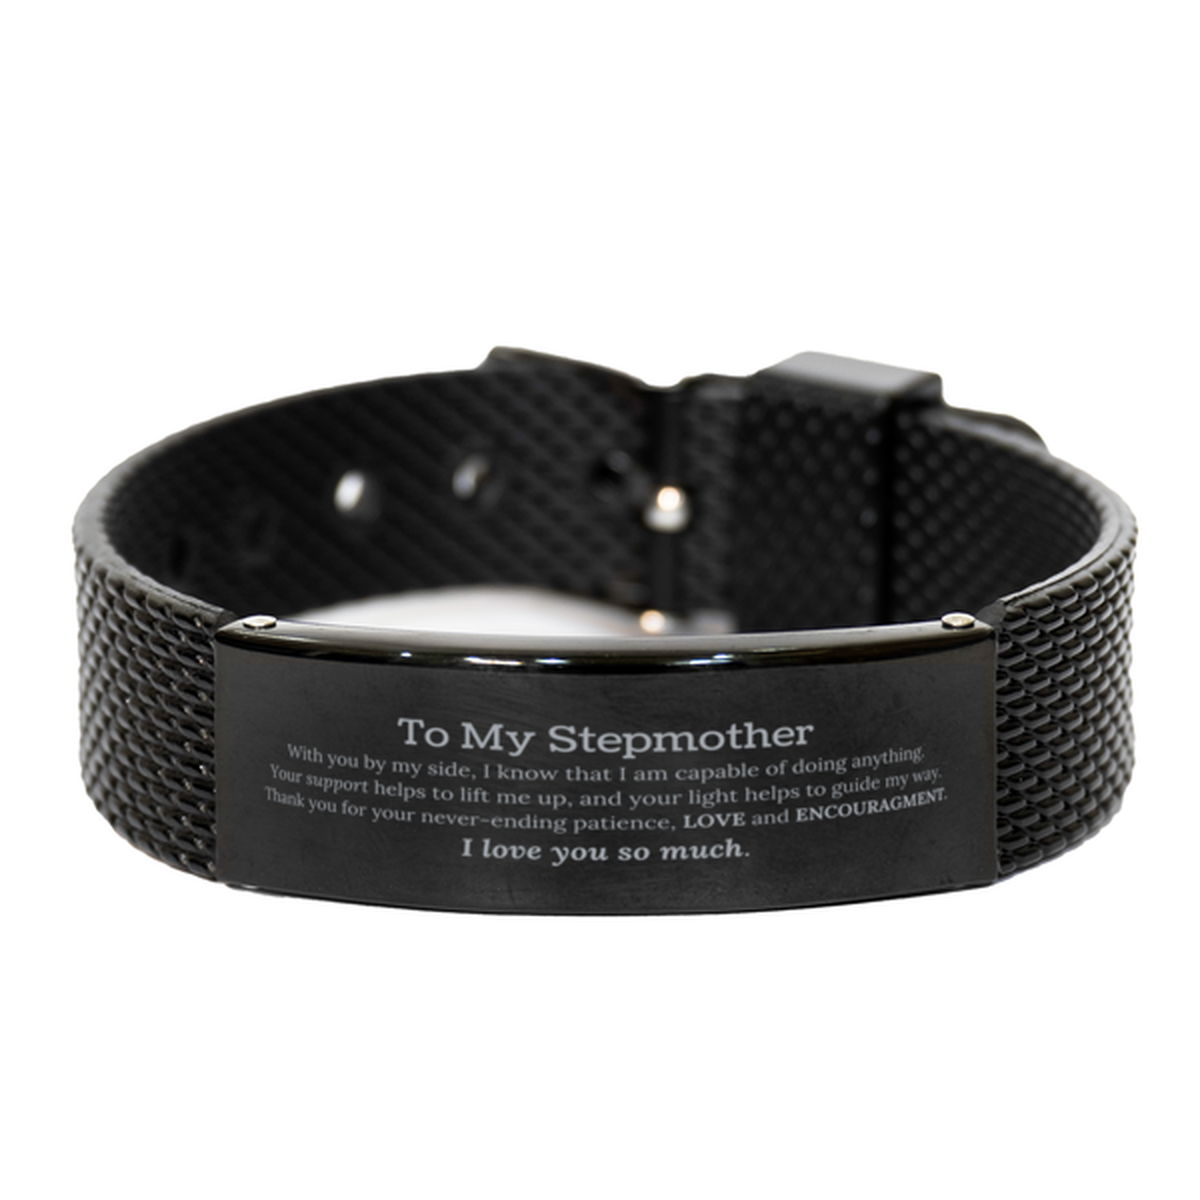 Appreciation Stepmother Black Shark Mesh Bracelet Gifts, To My Stepmother Birthday Christmas Wedding Keepsake Gifts for Stepmother With you by my side, I know that I am capable of doing anything. I love you so much